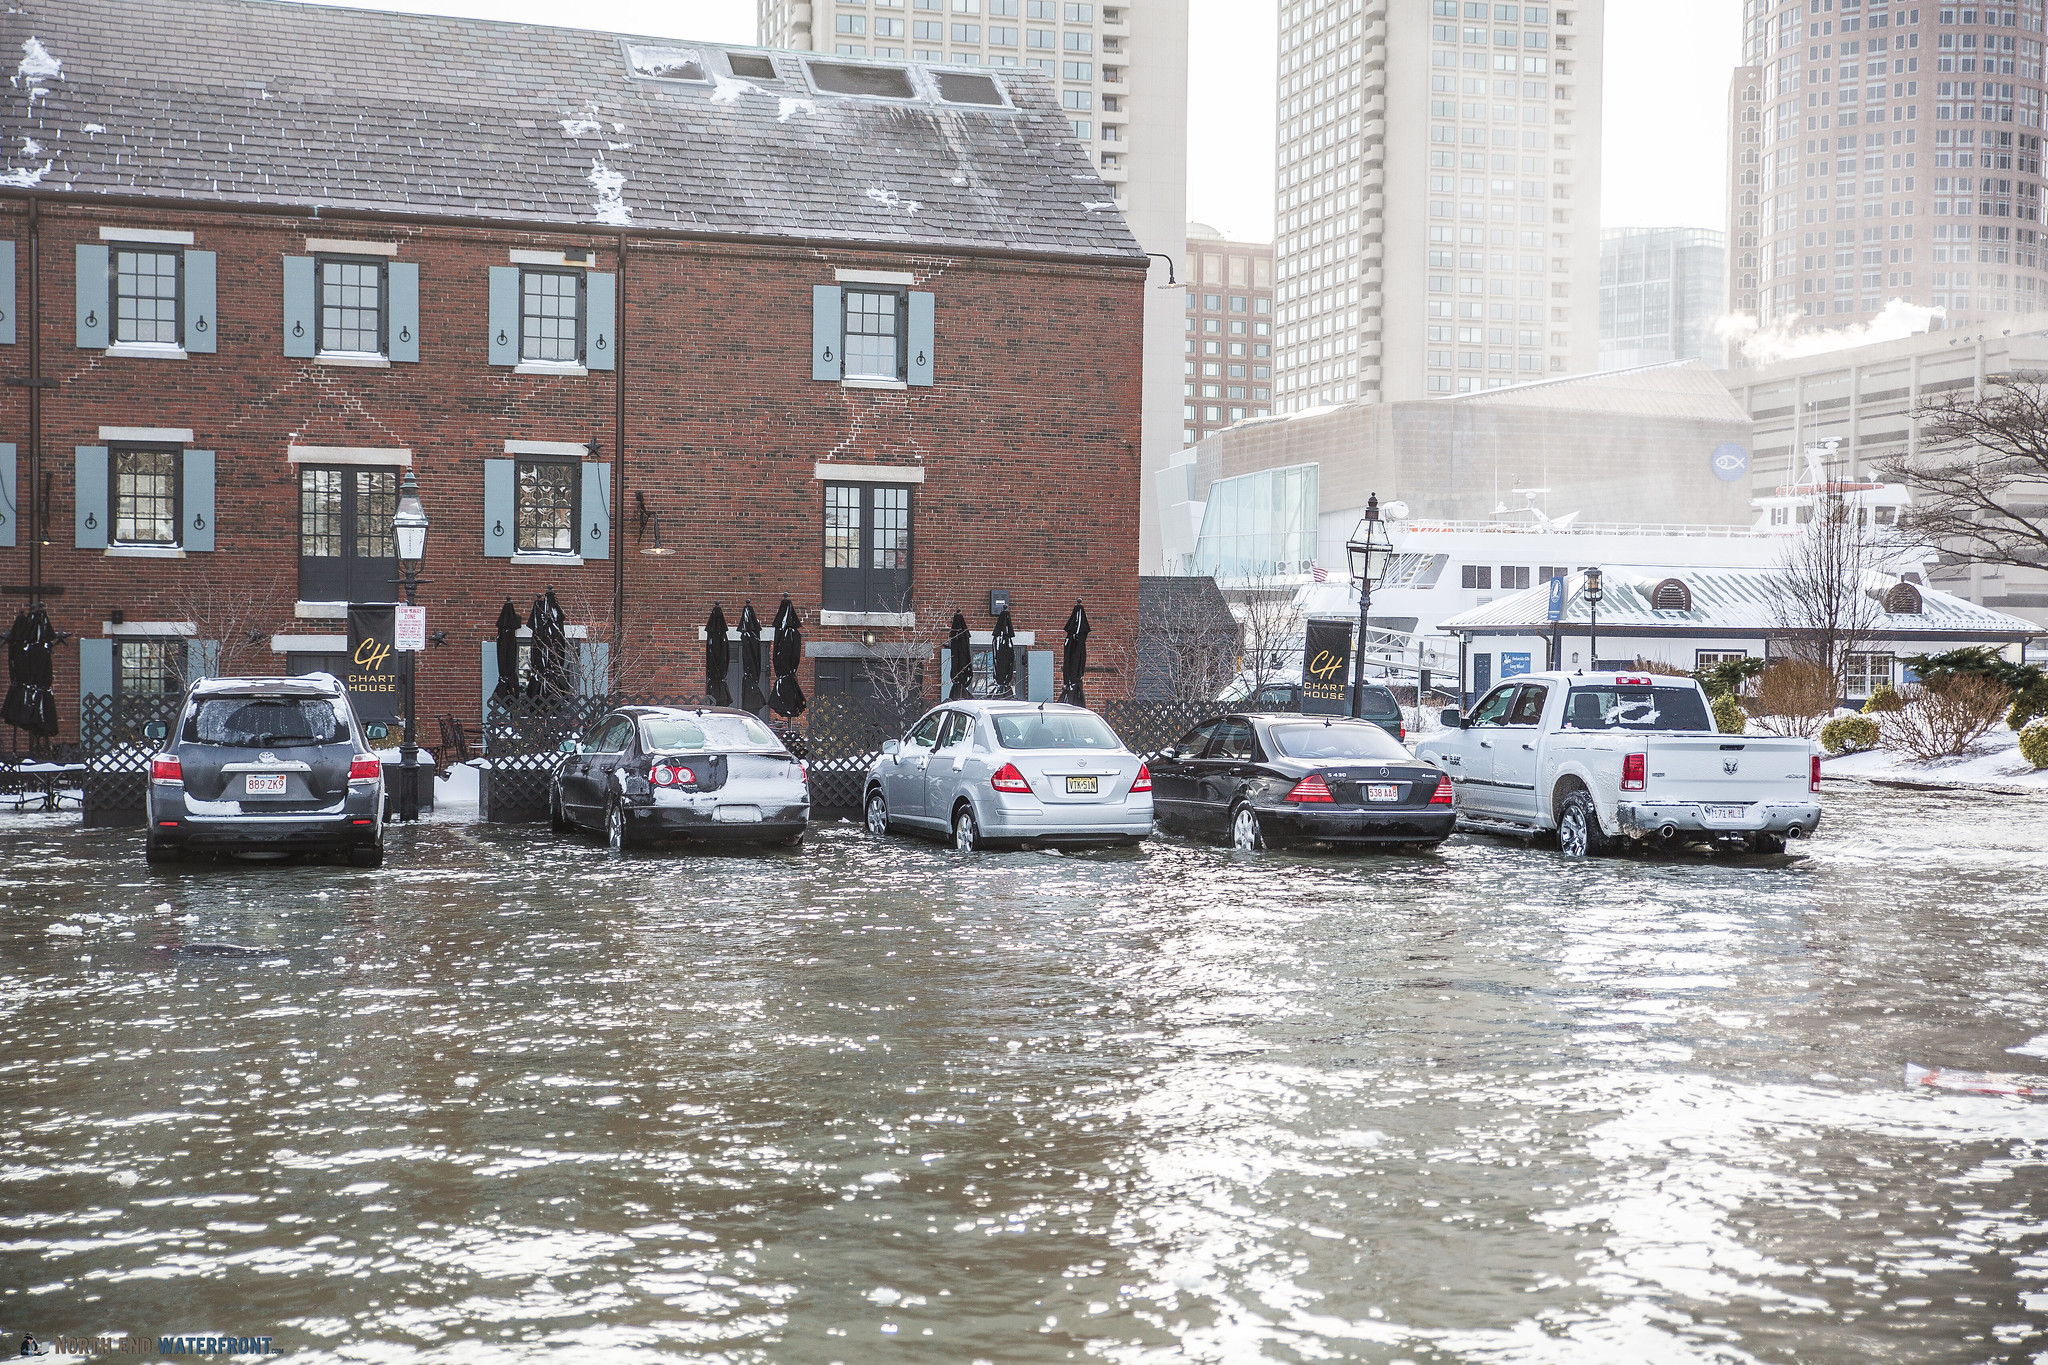 Preparing for the rise: A look at sea level rise in East Boston